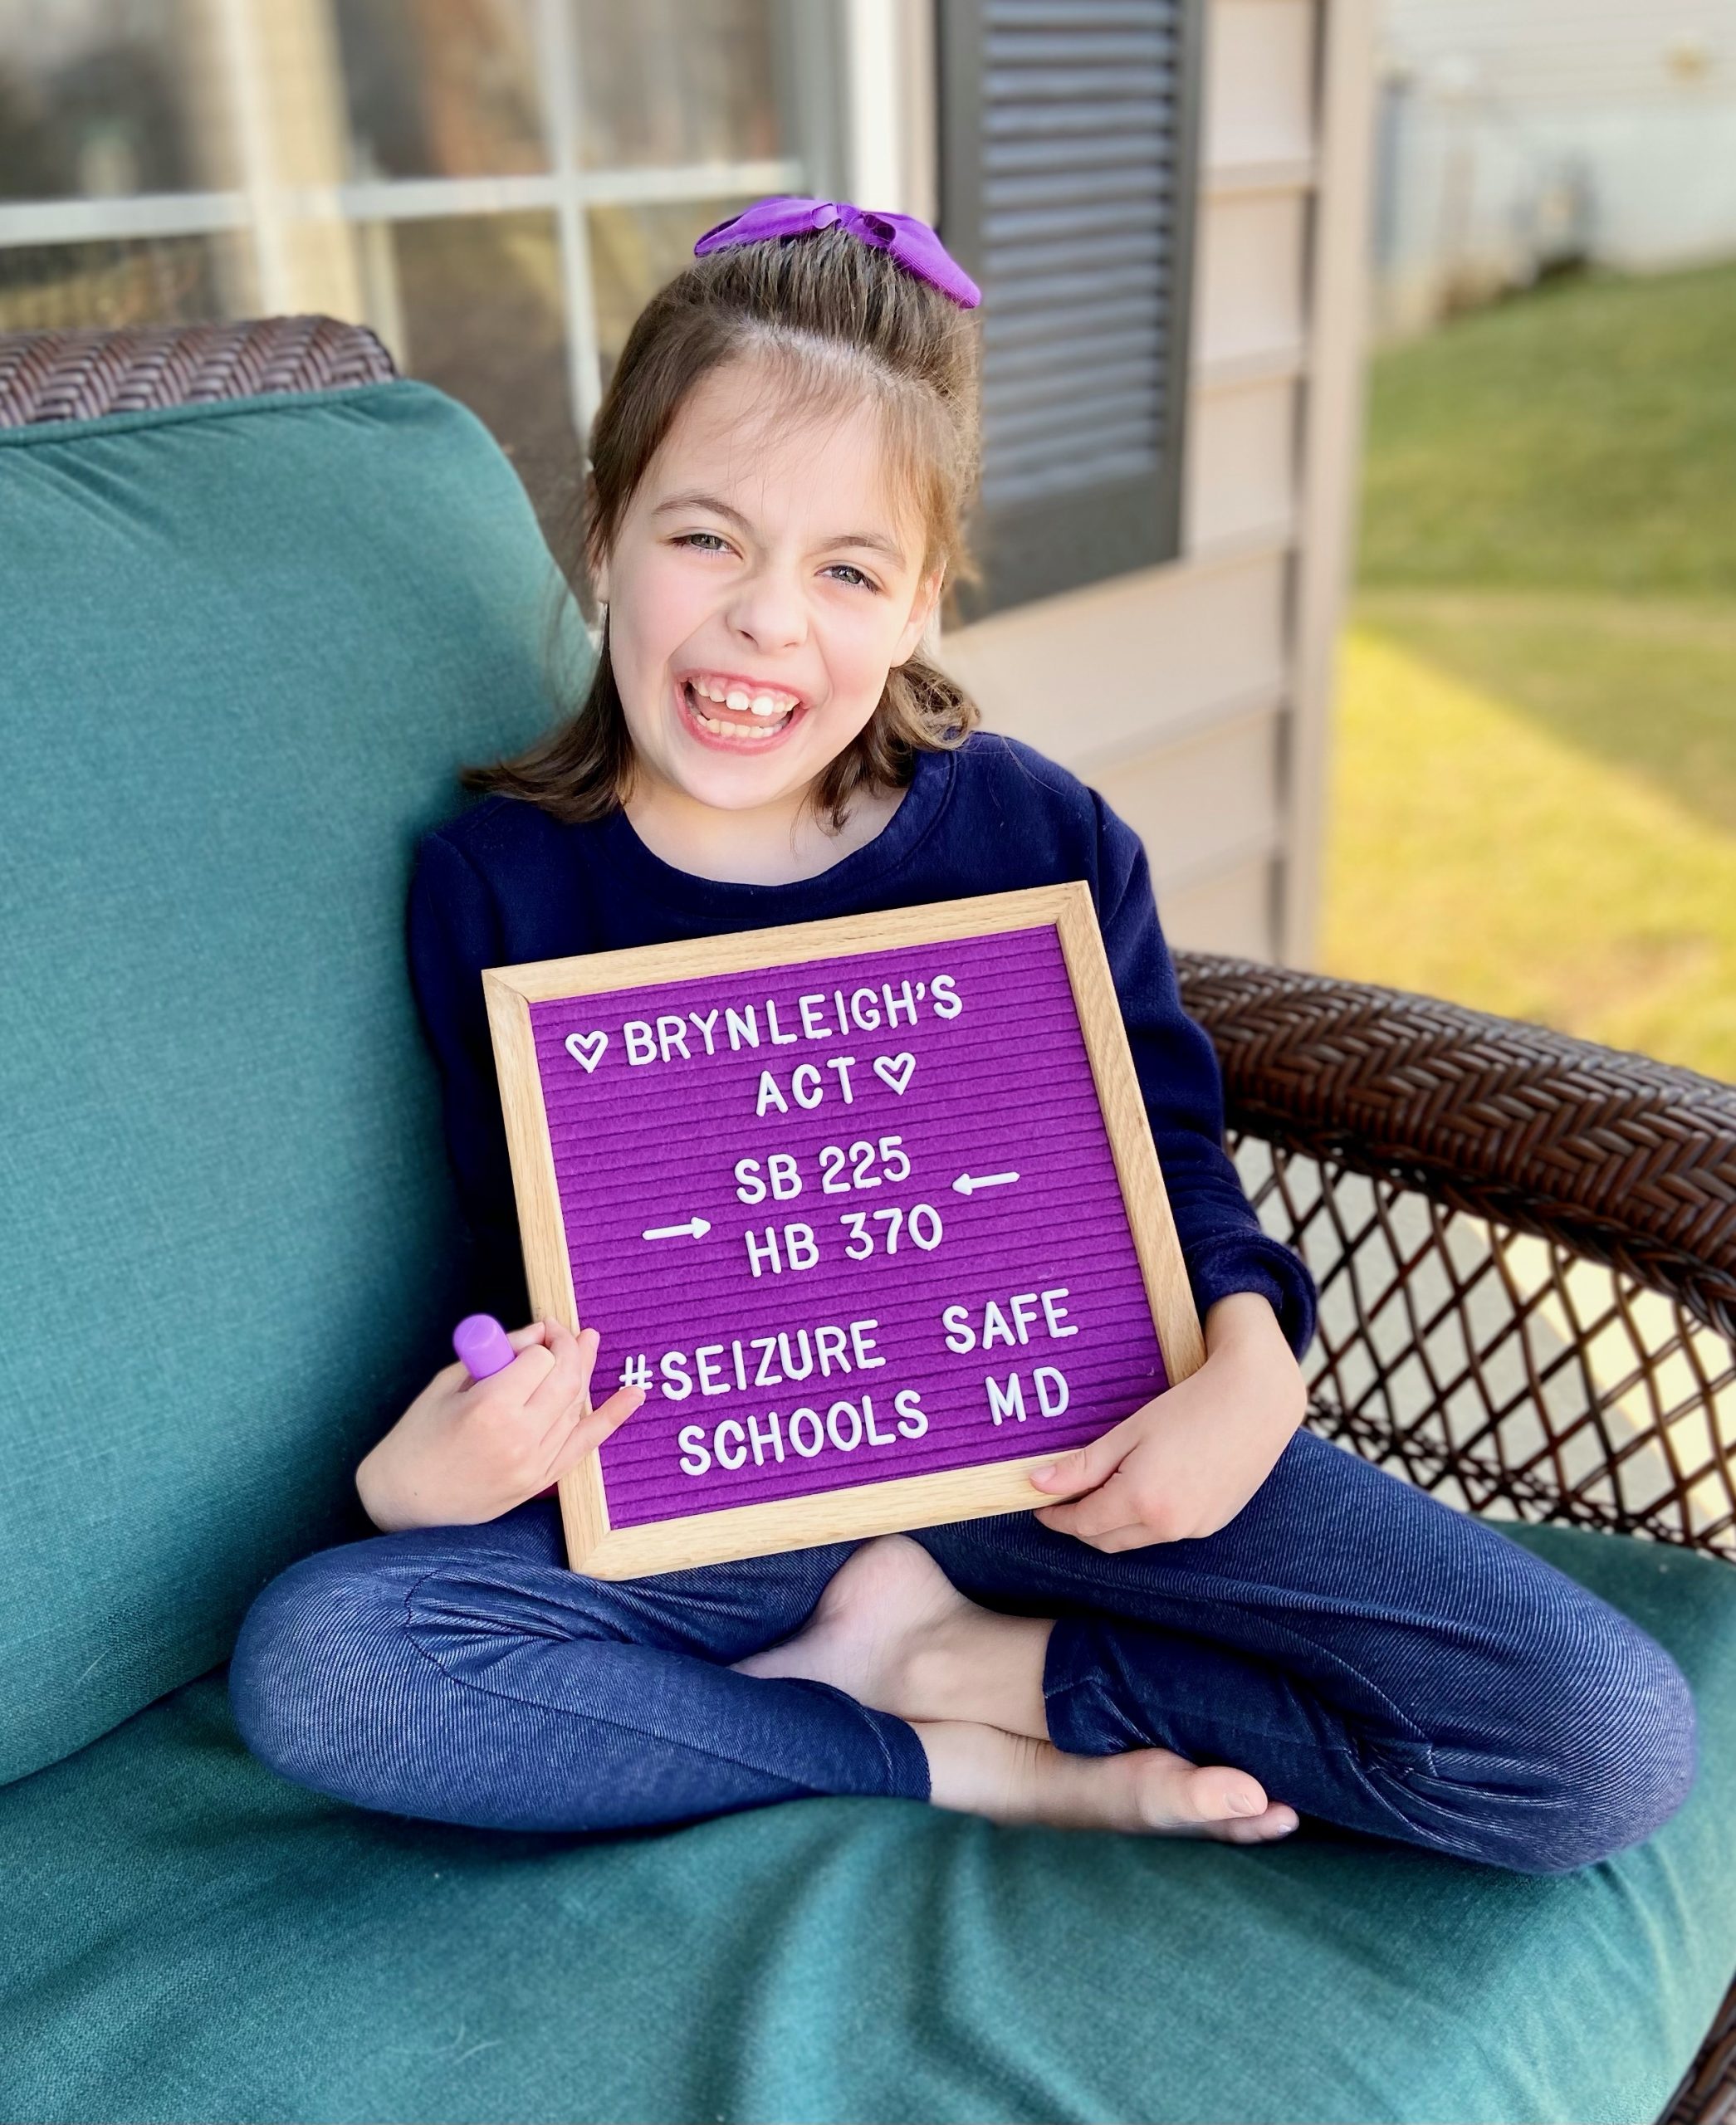 Brynleigh Shillinger at her home in Frederick County, Maryland, in January 2021. A bill in the General Assembly is named after her. Courtesy of Lauren Shillinger.